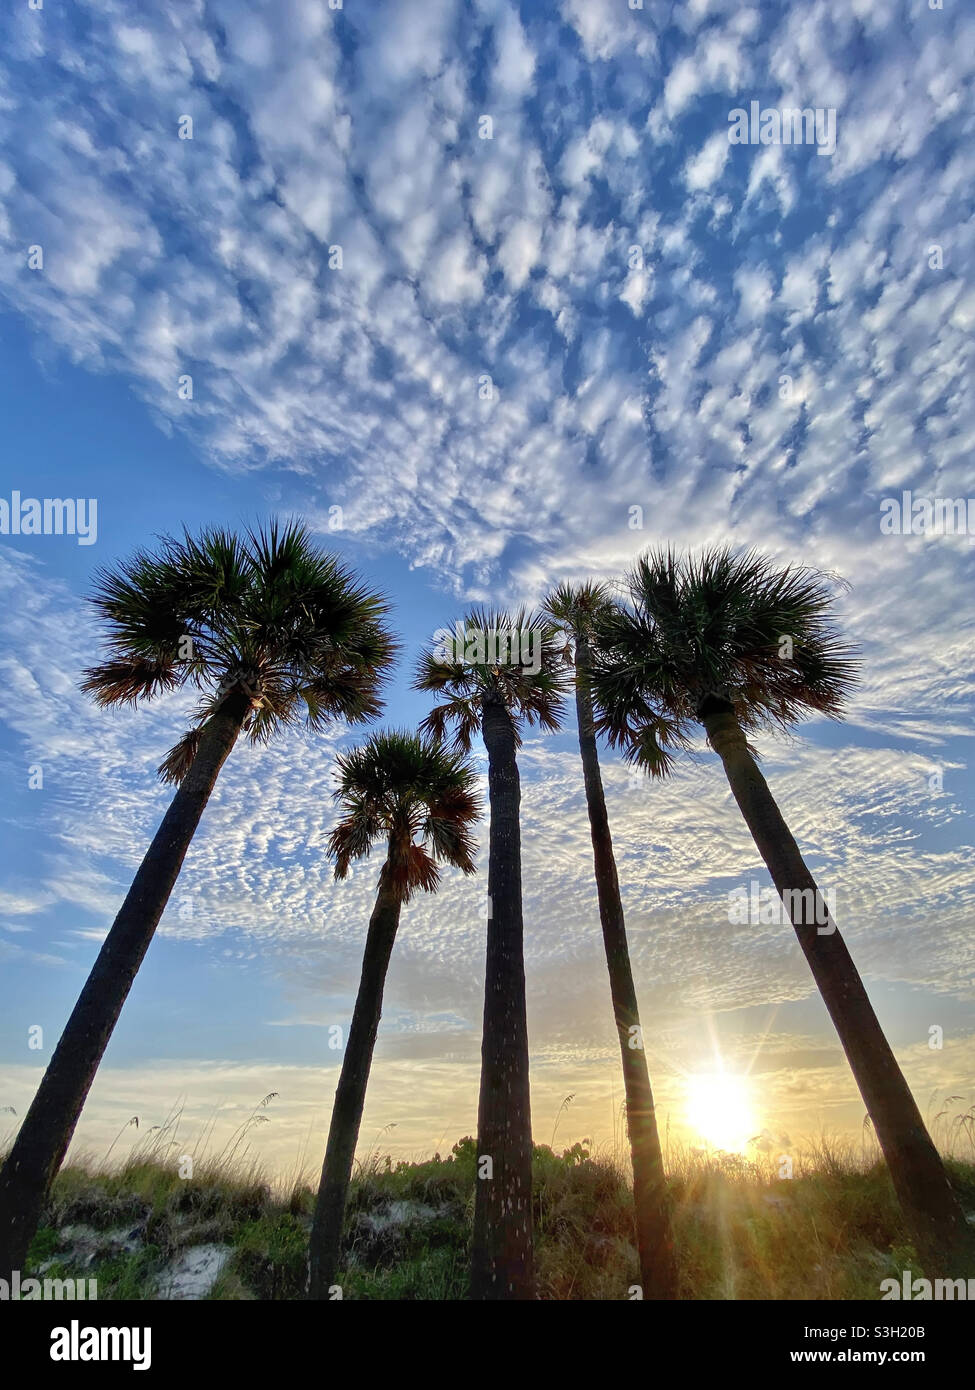 Low angle view of palm trees at sunset Stock Photo